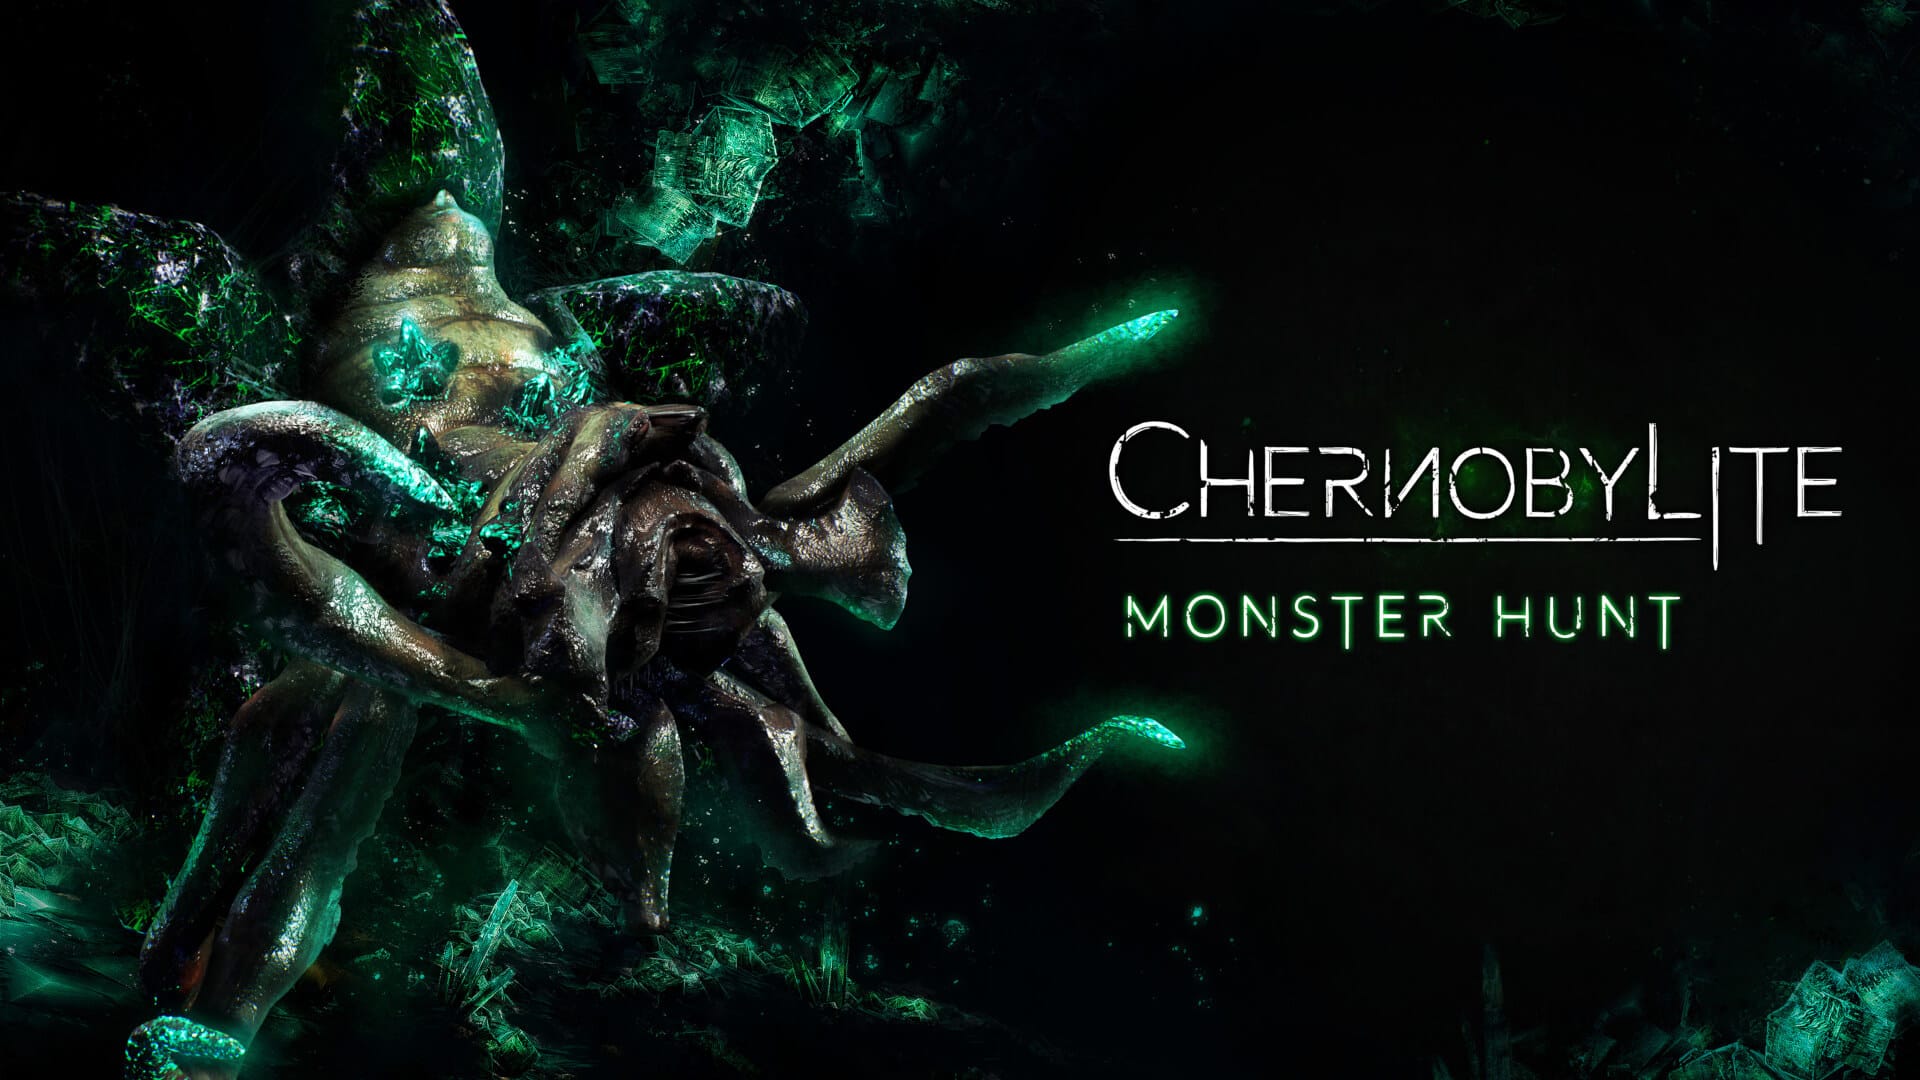 Promotional artwork for the new Chernobylite update